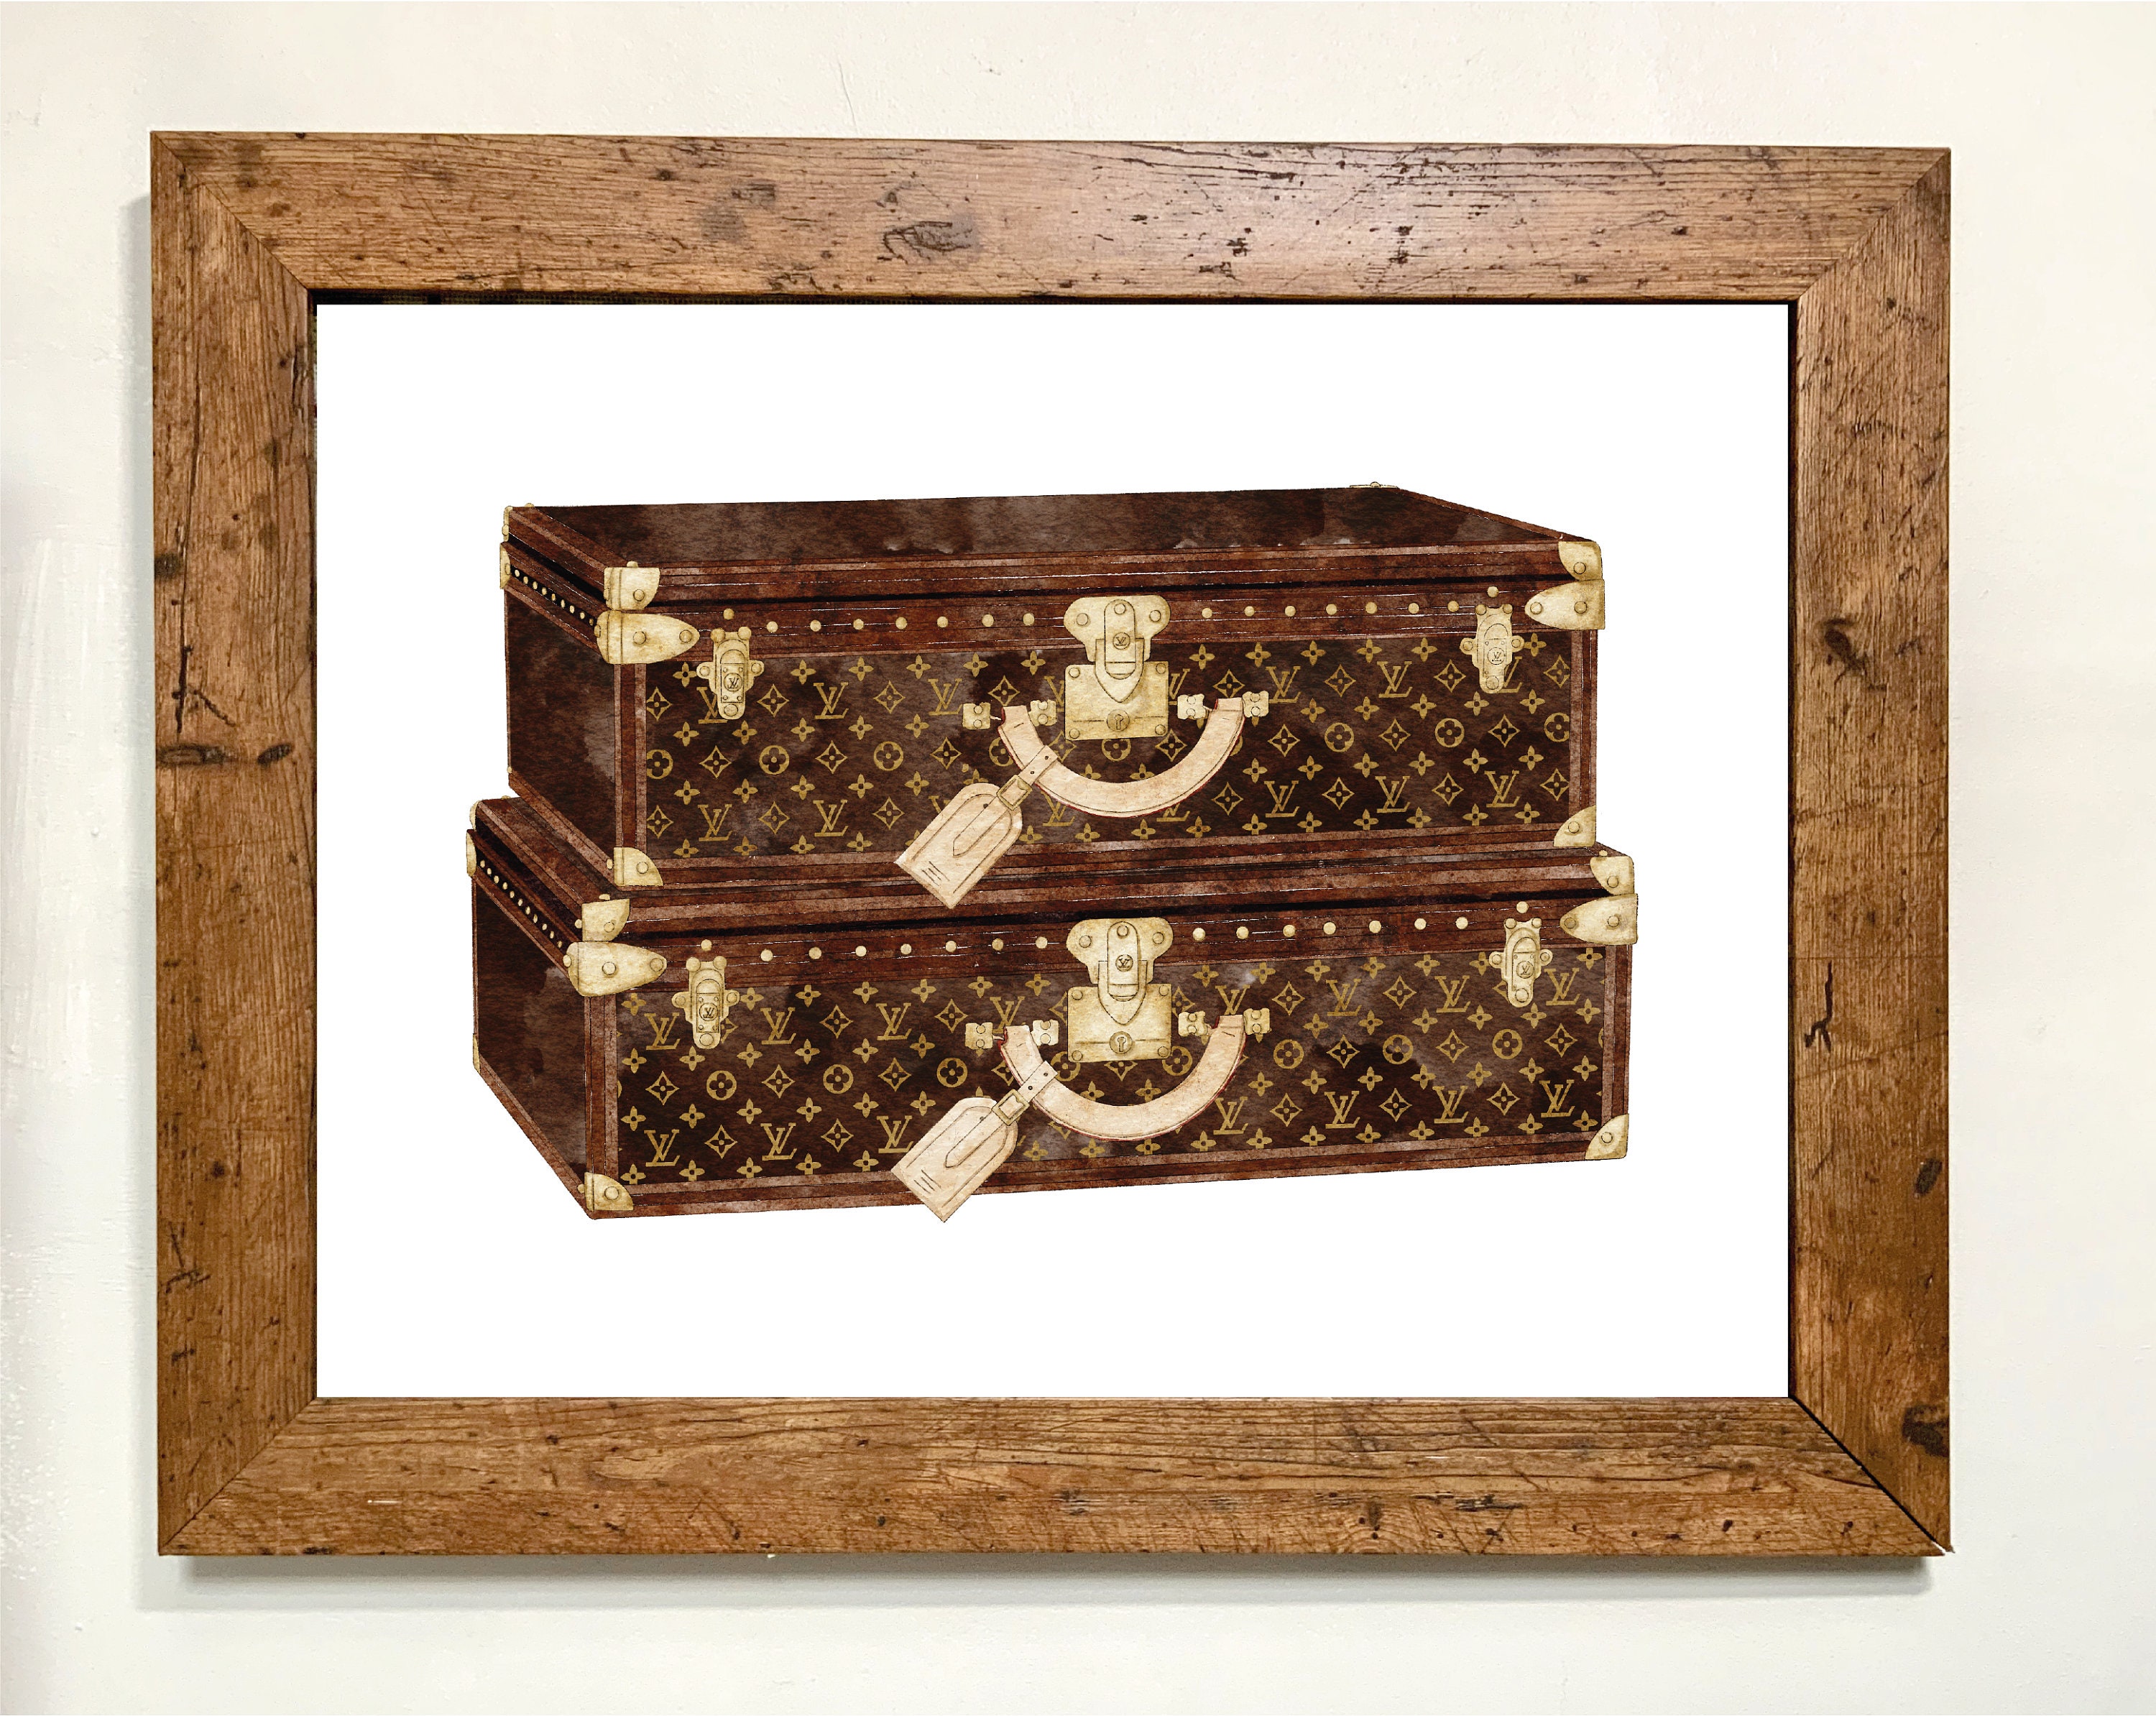 REVEALING MY LV MALLE FLEURS TRUNK - how I chose it, inclusions, painting  etc. 